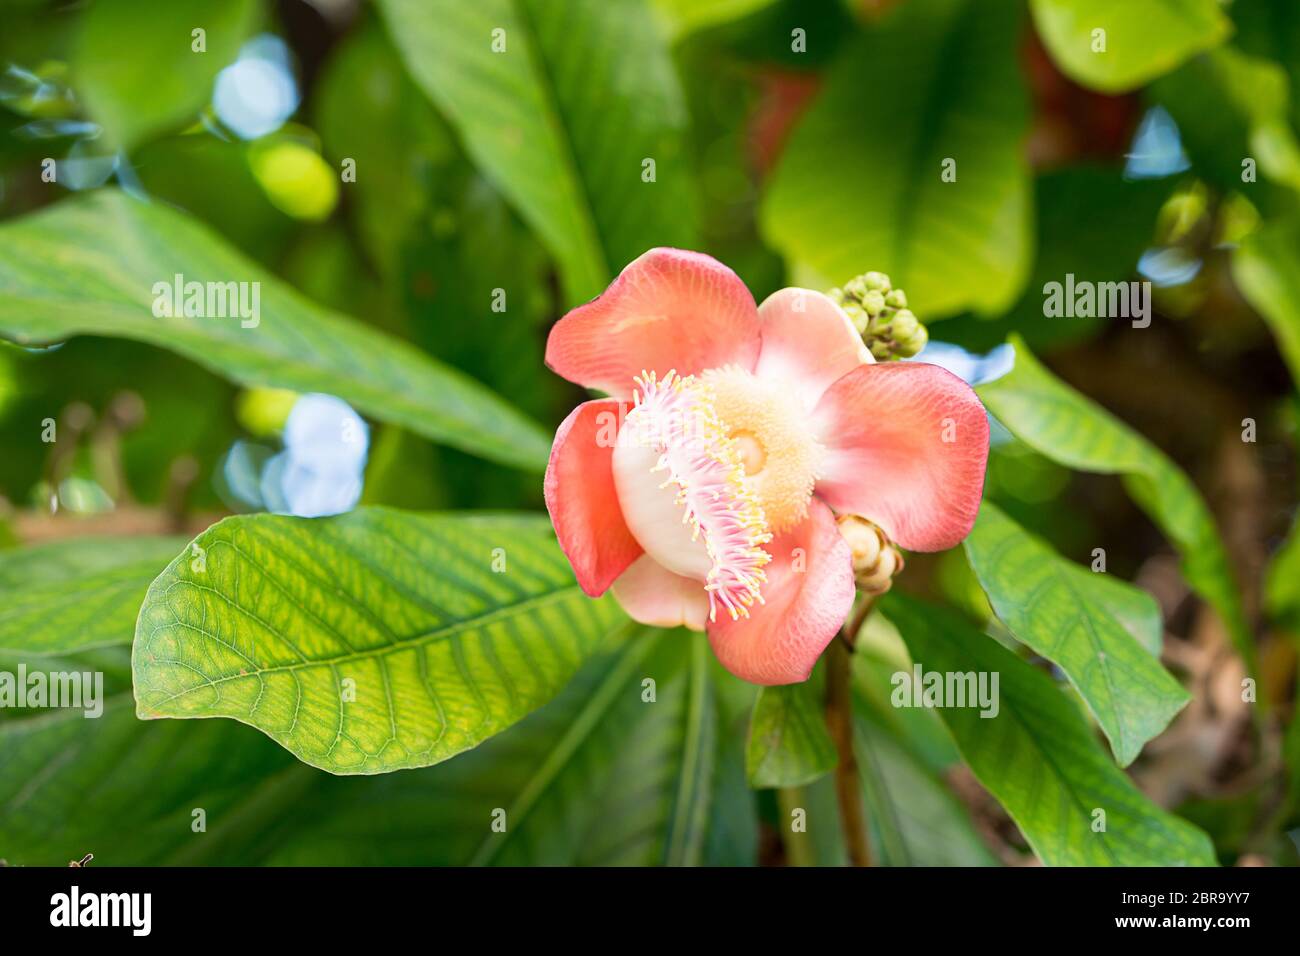 Shorea robusta or Cannonball flower or Sal flowers (Couroupita guianensis) on the tree Stock Photo